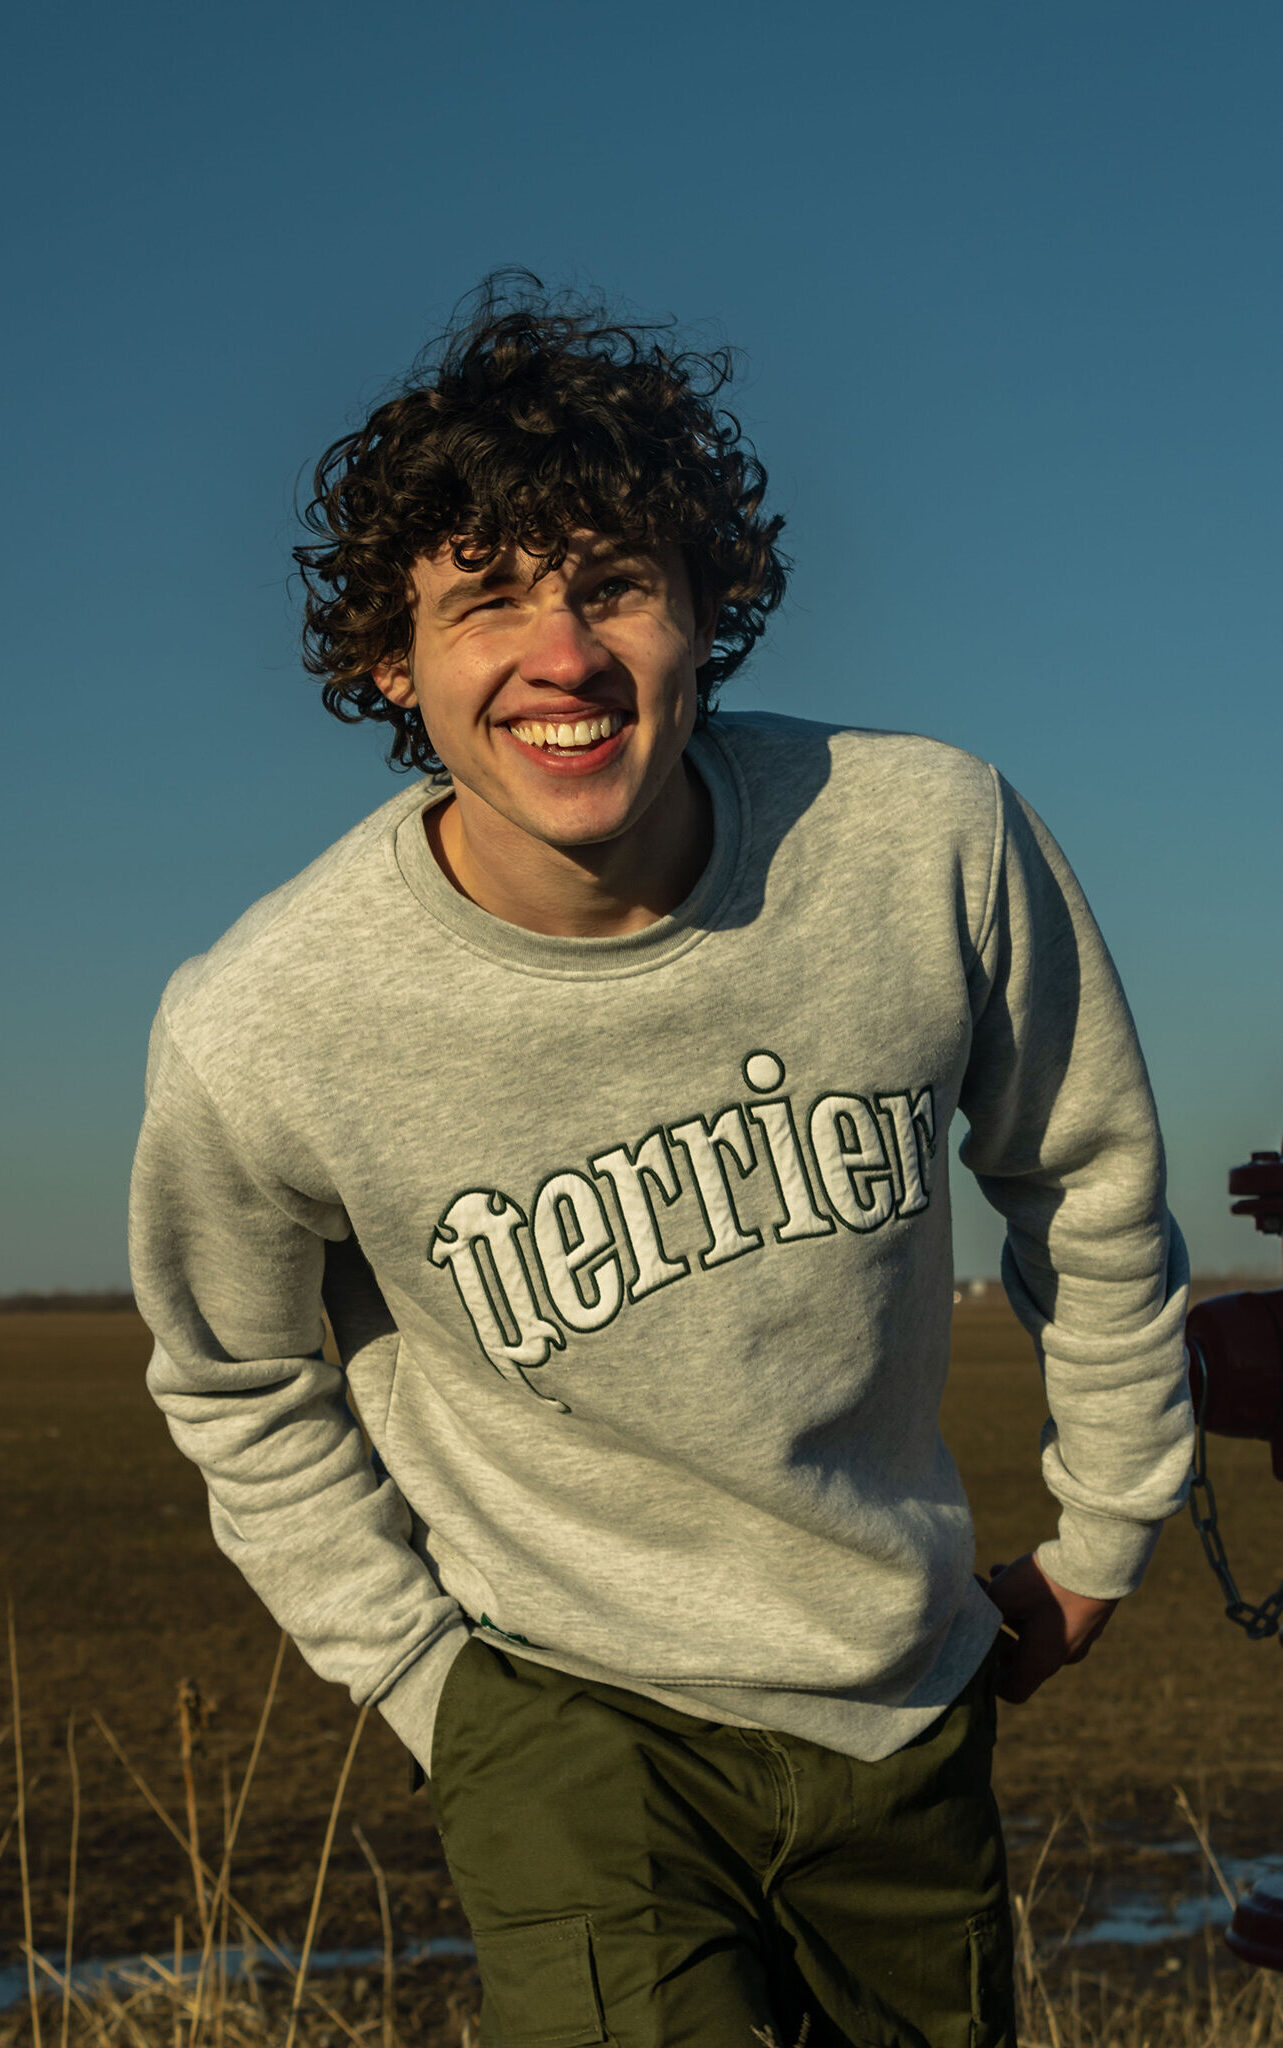 A teen boy in a grey sweatshirt stands in a field leaning towards the camera.